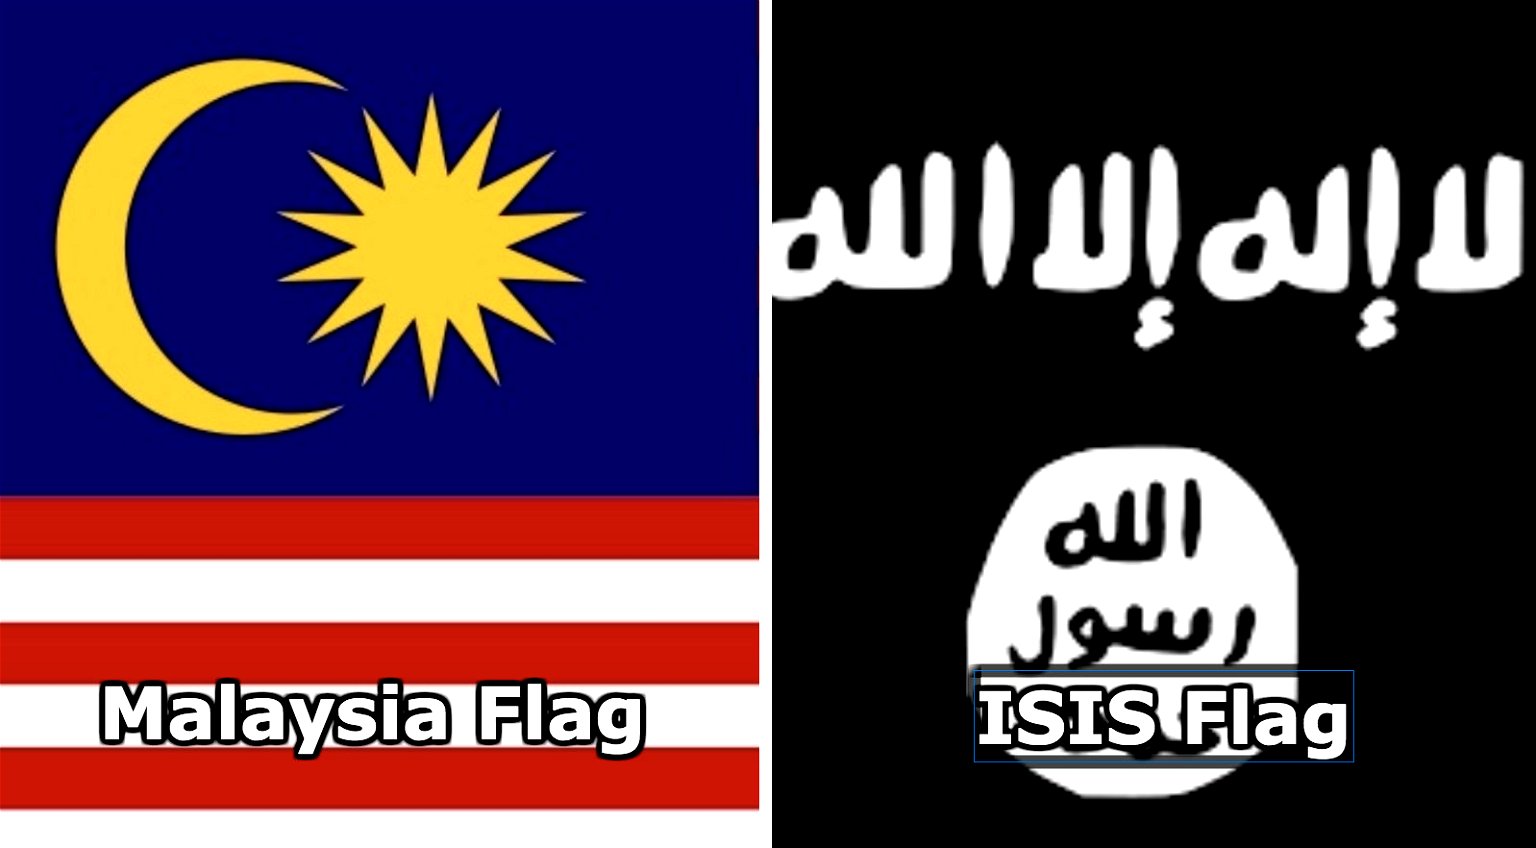 Kansas Engineer Reported to FBI After Group Mistakes His Malaysia Flag For ISIS